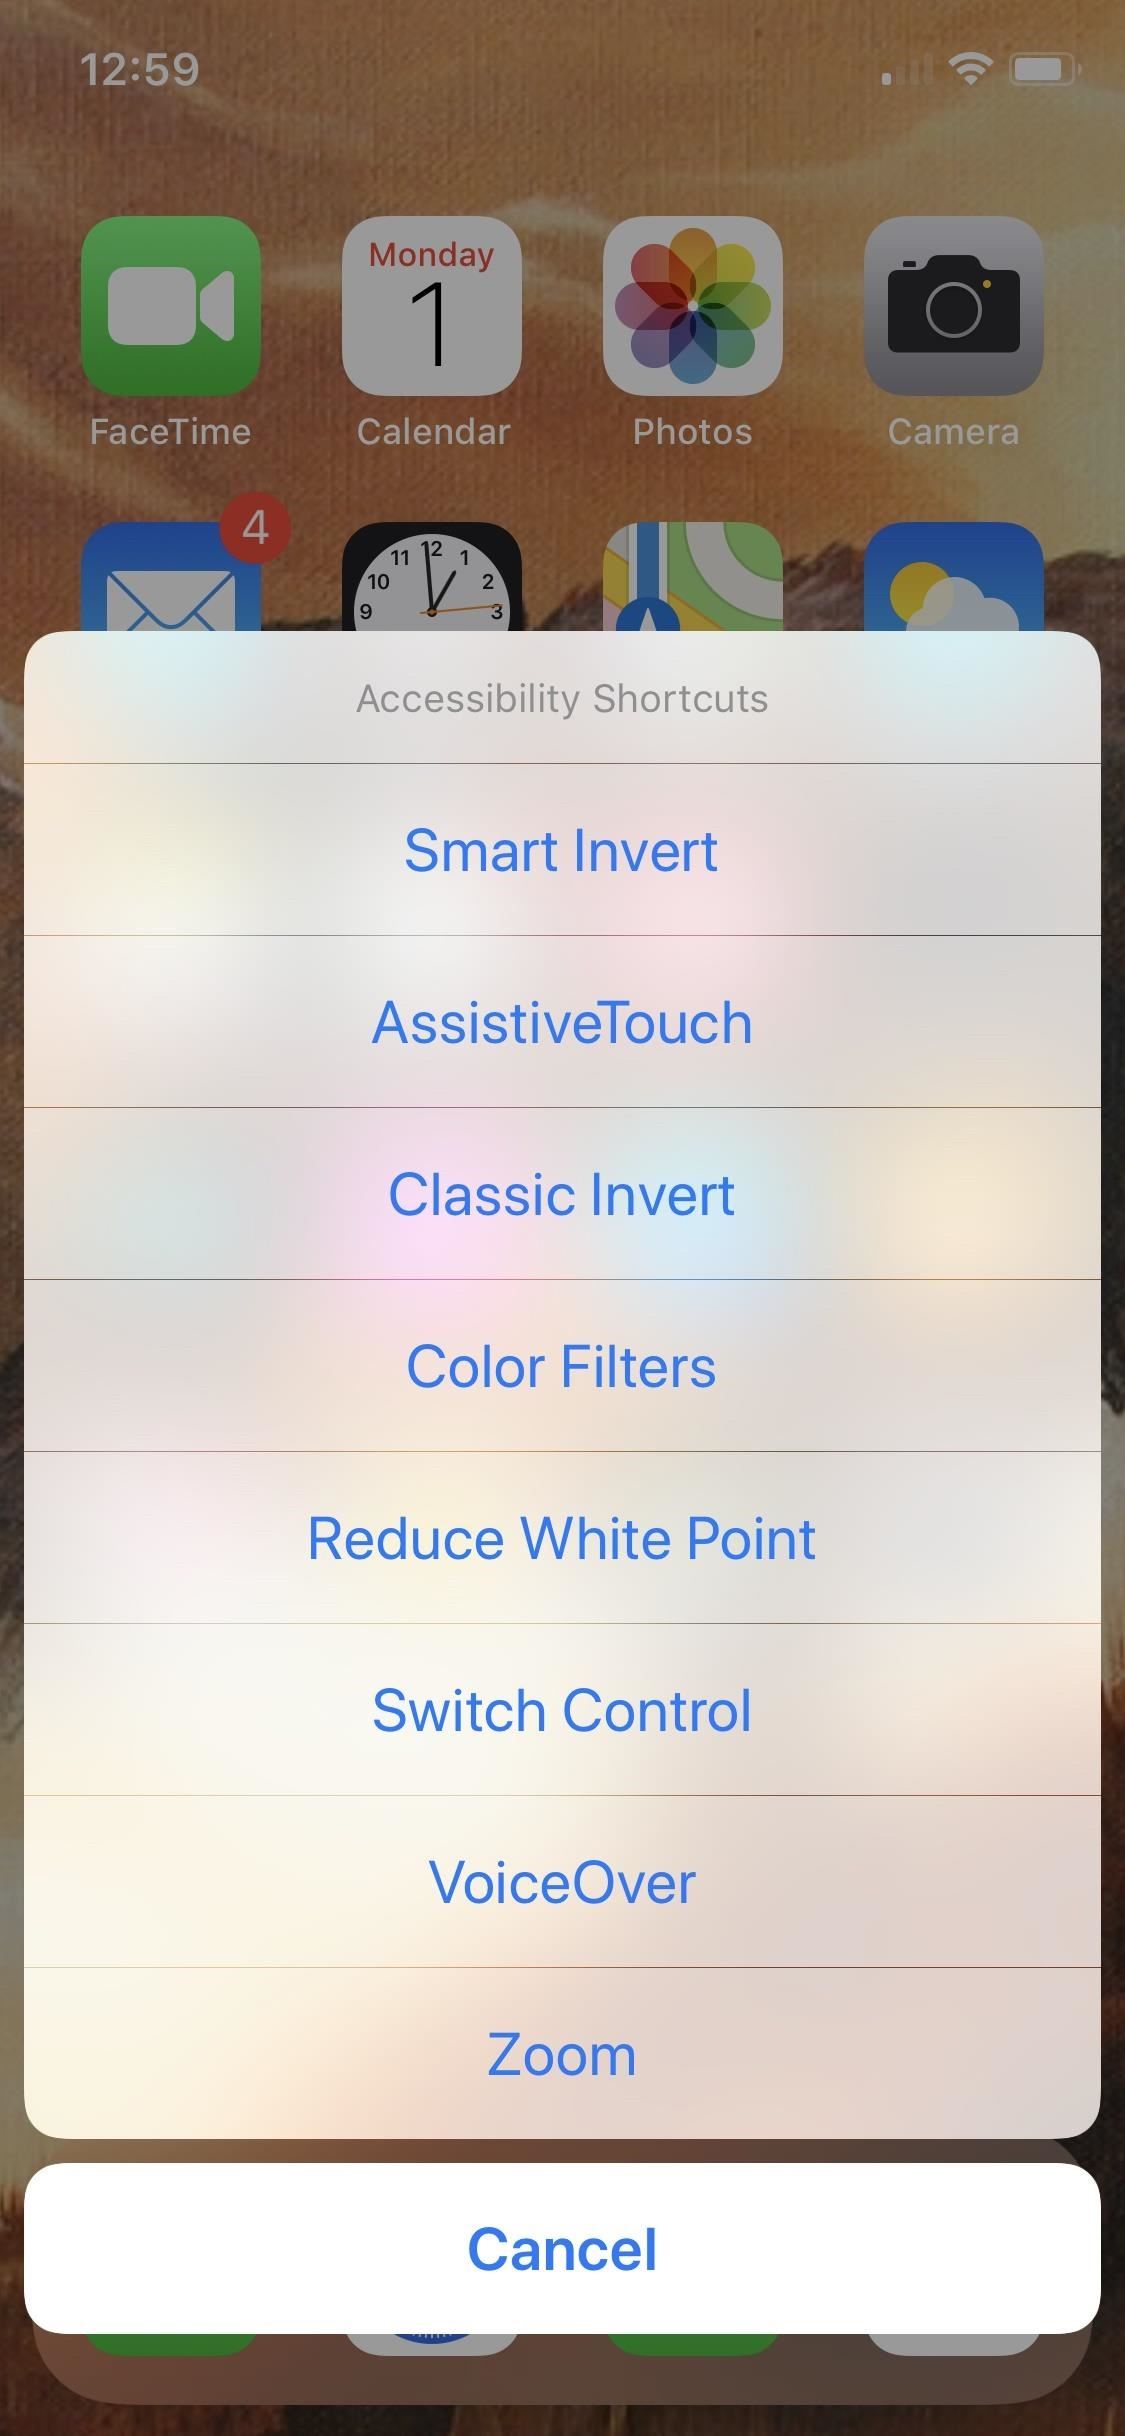 How to Fix a Slow Sleep Button on Your iPhone